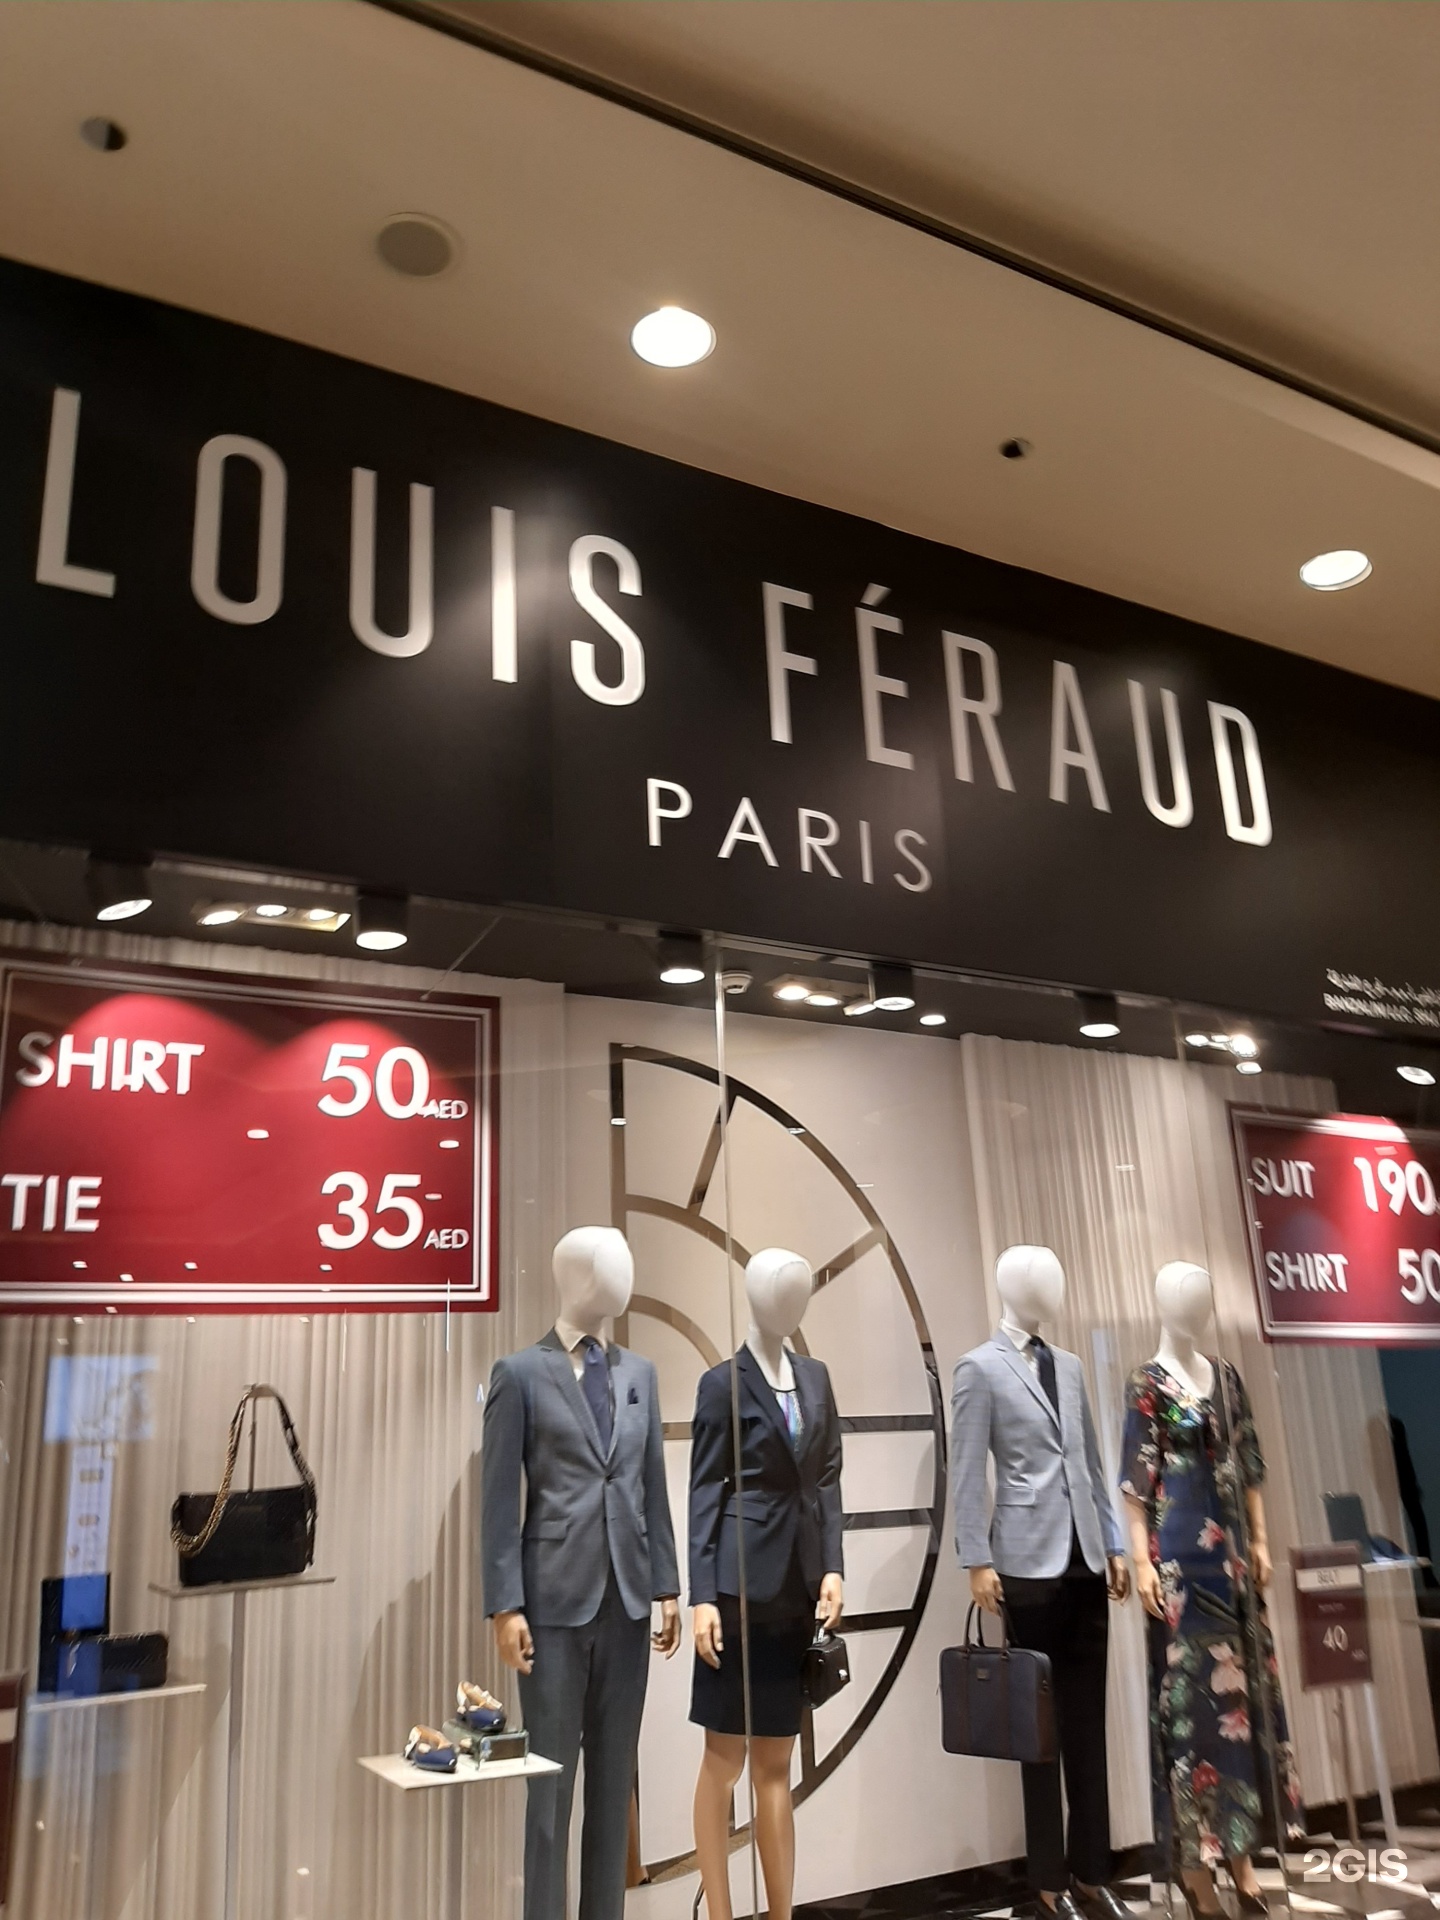 Sahara Centre - Men's and ladies' formal and casual wear at amazing prices  at Louis Feraud. #louisferaud #men #ladies #fashion #style #suits #dress  #accessories #shoes #bags #ootd #saharacentre #sharjah #uae